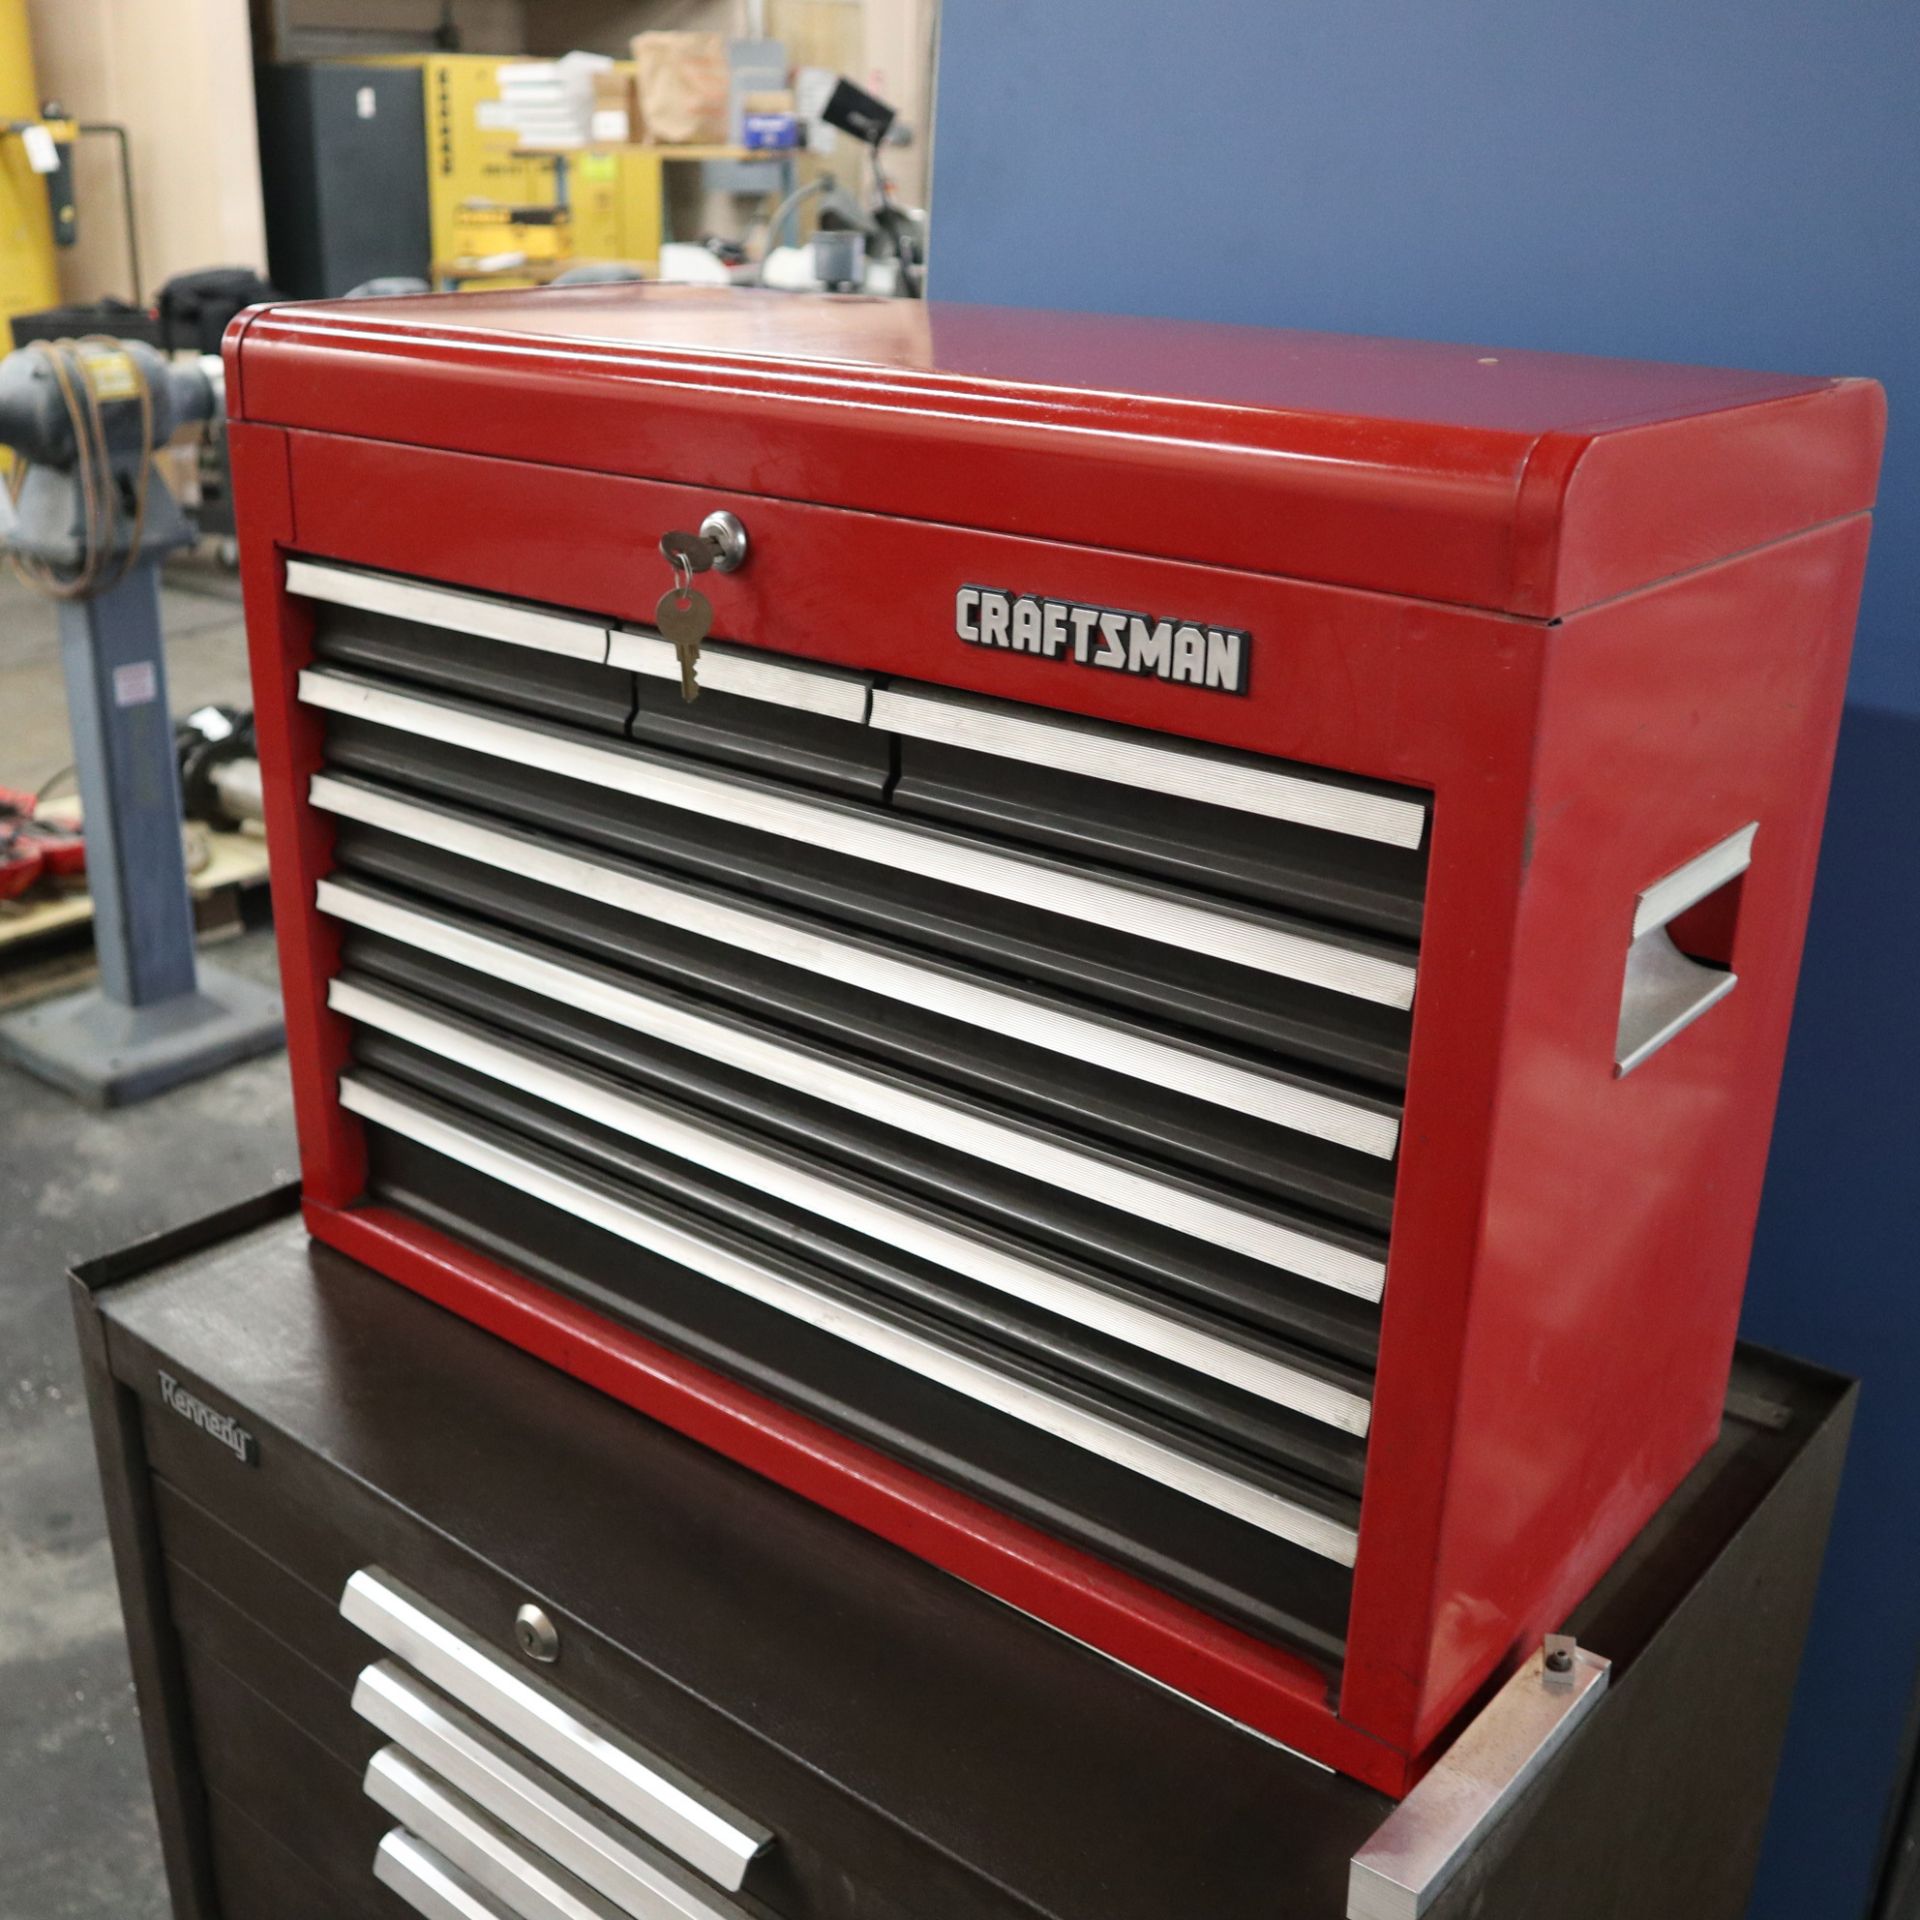 LOT TO INCLUDE: (1) CRAFTSMAN TOOLBOX 9 DRAWER WITH MISC. WRENCHES, SOCKETS, AND TOOLING - Image 2 of 14